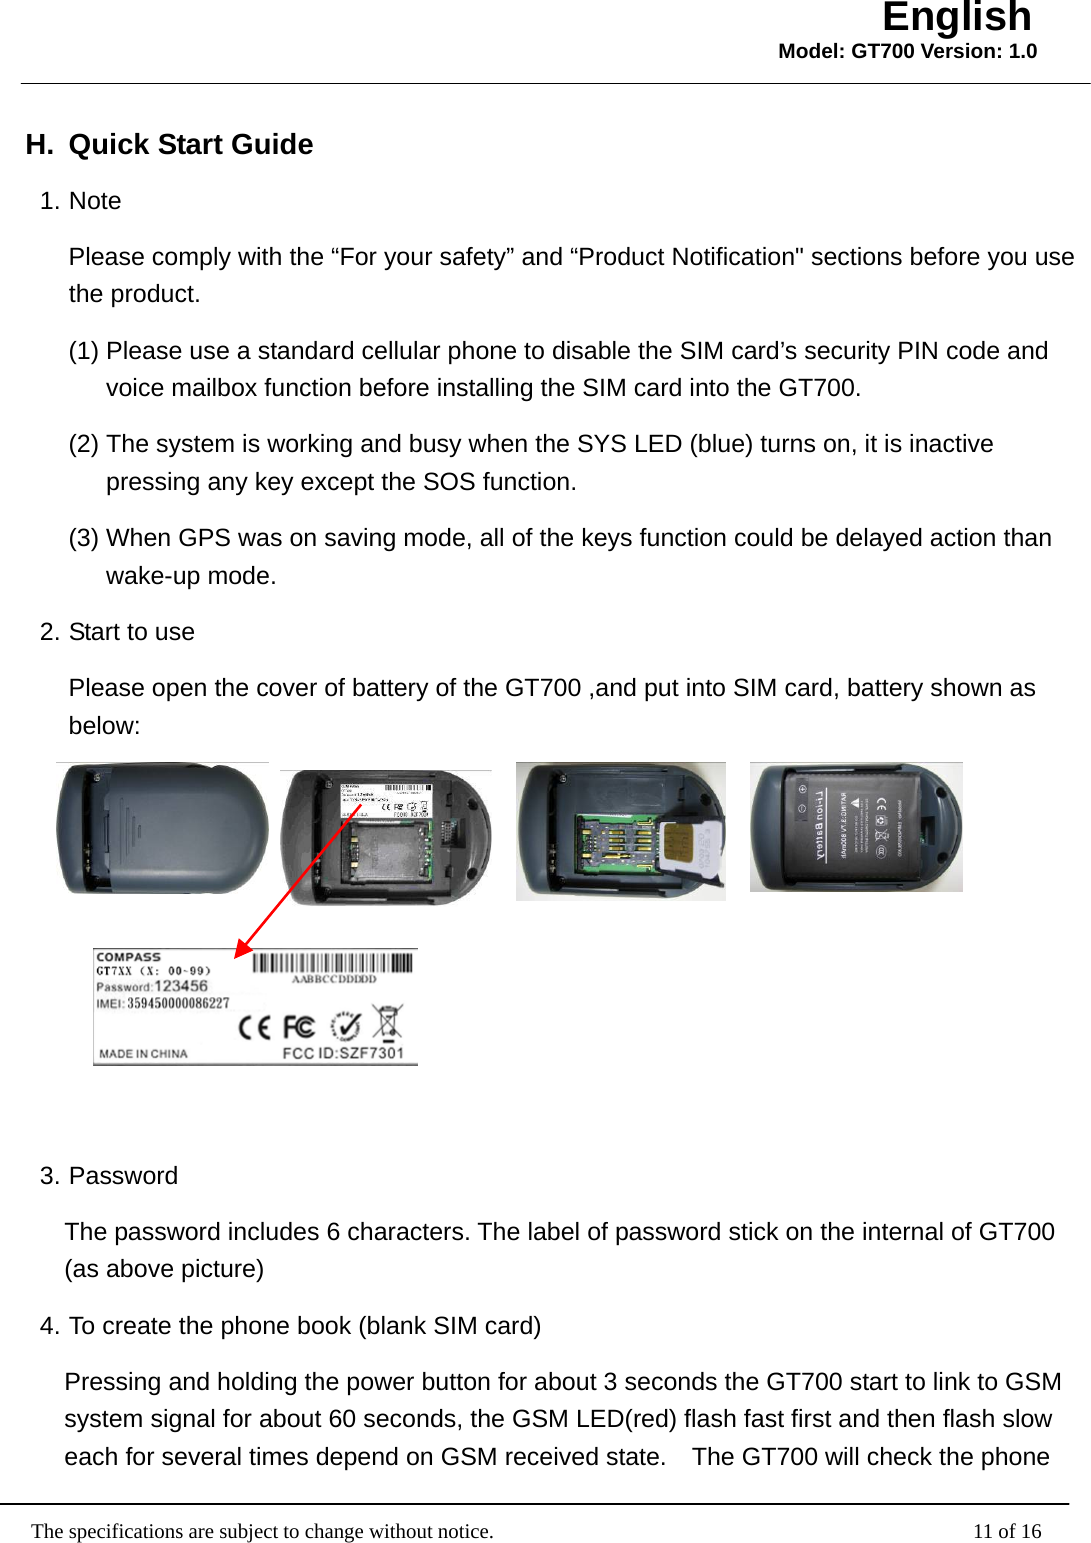                                                   The specifications are subject to change without notice.                                              11 of 16 English Model: GT700 Version: 1.0H.  Quick Start Guide 1. Note       Please comply with the “For your safety” and “Product Notification&quot; sections before you use the product.   (1) Please use a standard cellular phone to disable the SIM card’s security PIN code and voice mailbox function before installing the SIM card into the GT700. (2) The system is working and busy when the SYS LED (blue) turns on, it is inactive pressing any key except the SOS function. (3) When GPS was on saving mode, all of the keys function could be delayed action than wake-up mode. 2. Start to use Please open the cover of battery of the GT700 ,and put into SIM card, battery shown as below:           3. Password   The password includes 6 characters. The label of password stick on the internal of GT700 (as above picture) 4. To create the phone book (blank SIM card) Pressing and holding the power button for about 3 seconds the GT700 start to link to GSM system signal for about 60 seconds, the GSM LED(red) flash fast first and then flash slow each for several times depend on GSM received state.    The GT700 will check the phone 